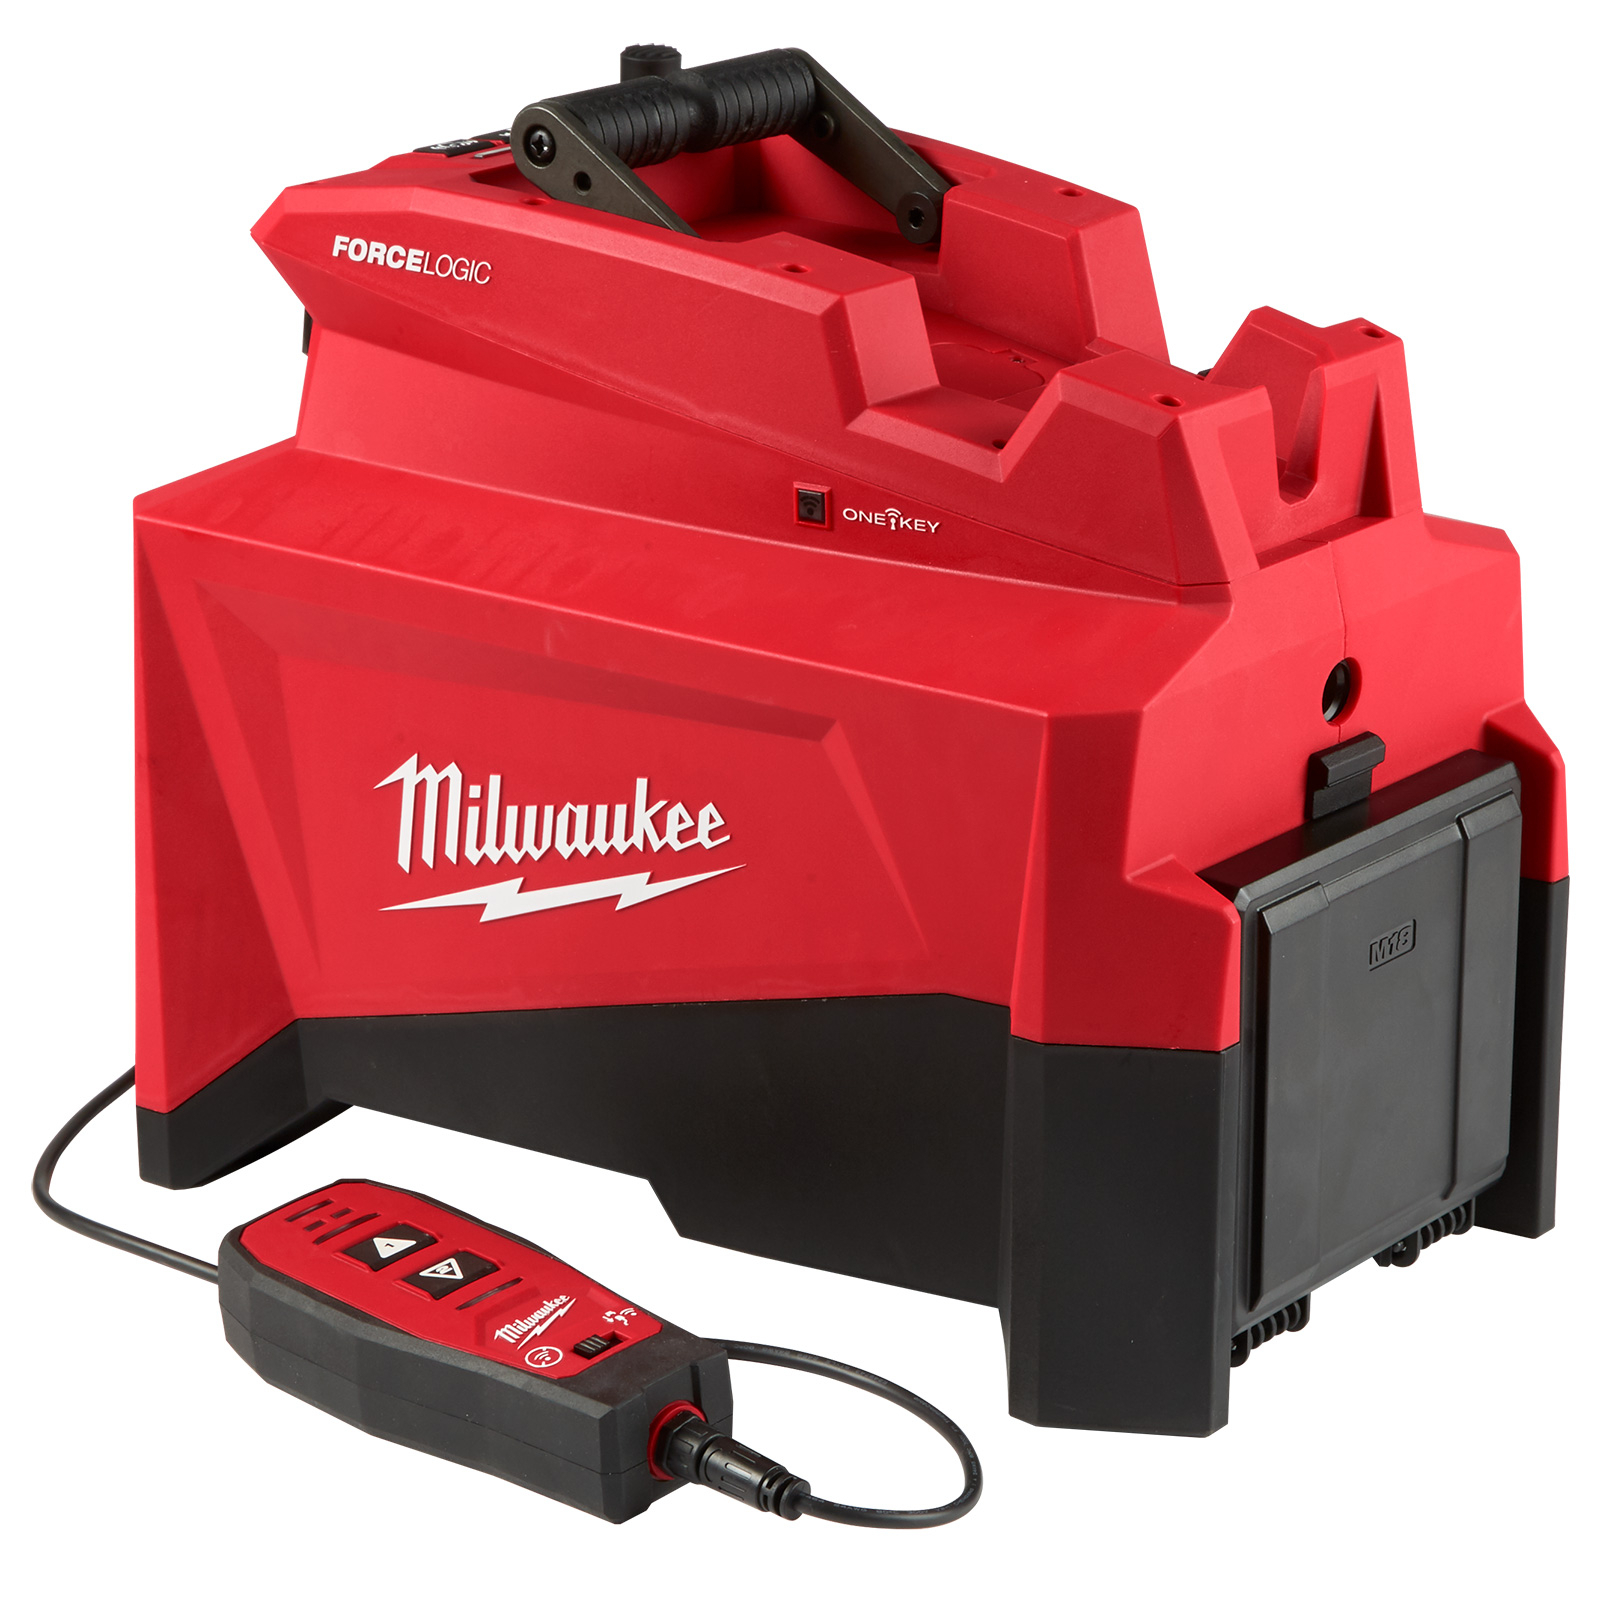 Milwaukee 18V FORCE LOGIC 10,000psi Brushless Hydraulic Pump w/ Remote M18HUP700R-0